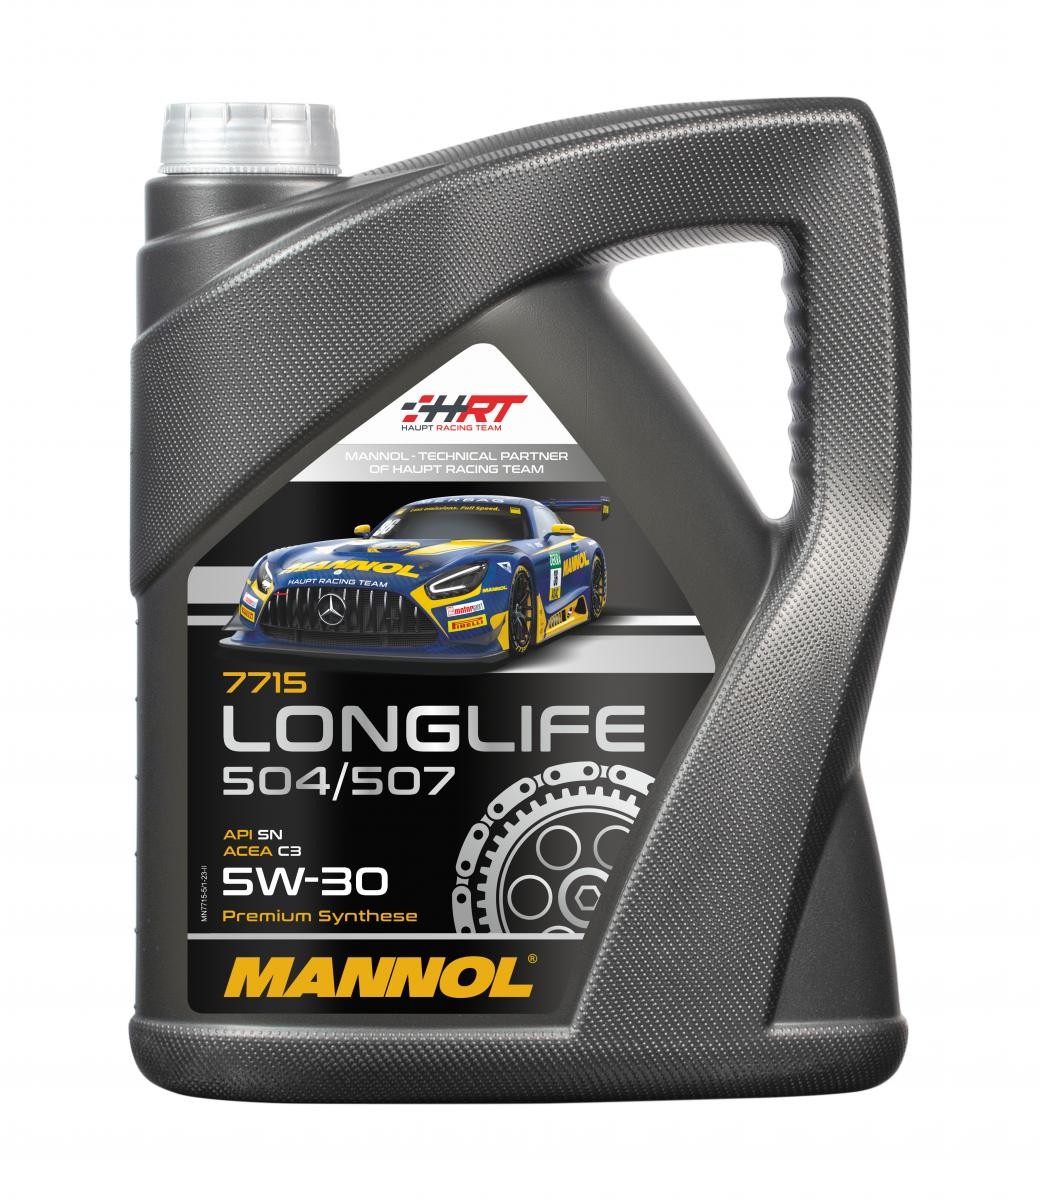 Engine oil MANNOL LONGLIFE 504/507 5W-30 5l, MN7715-5 ❱❱❱ price and  experience